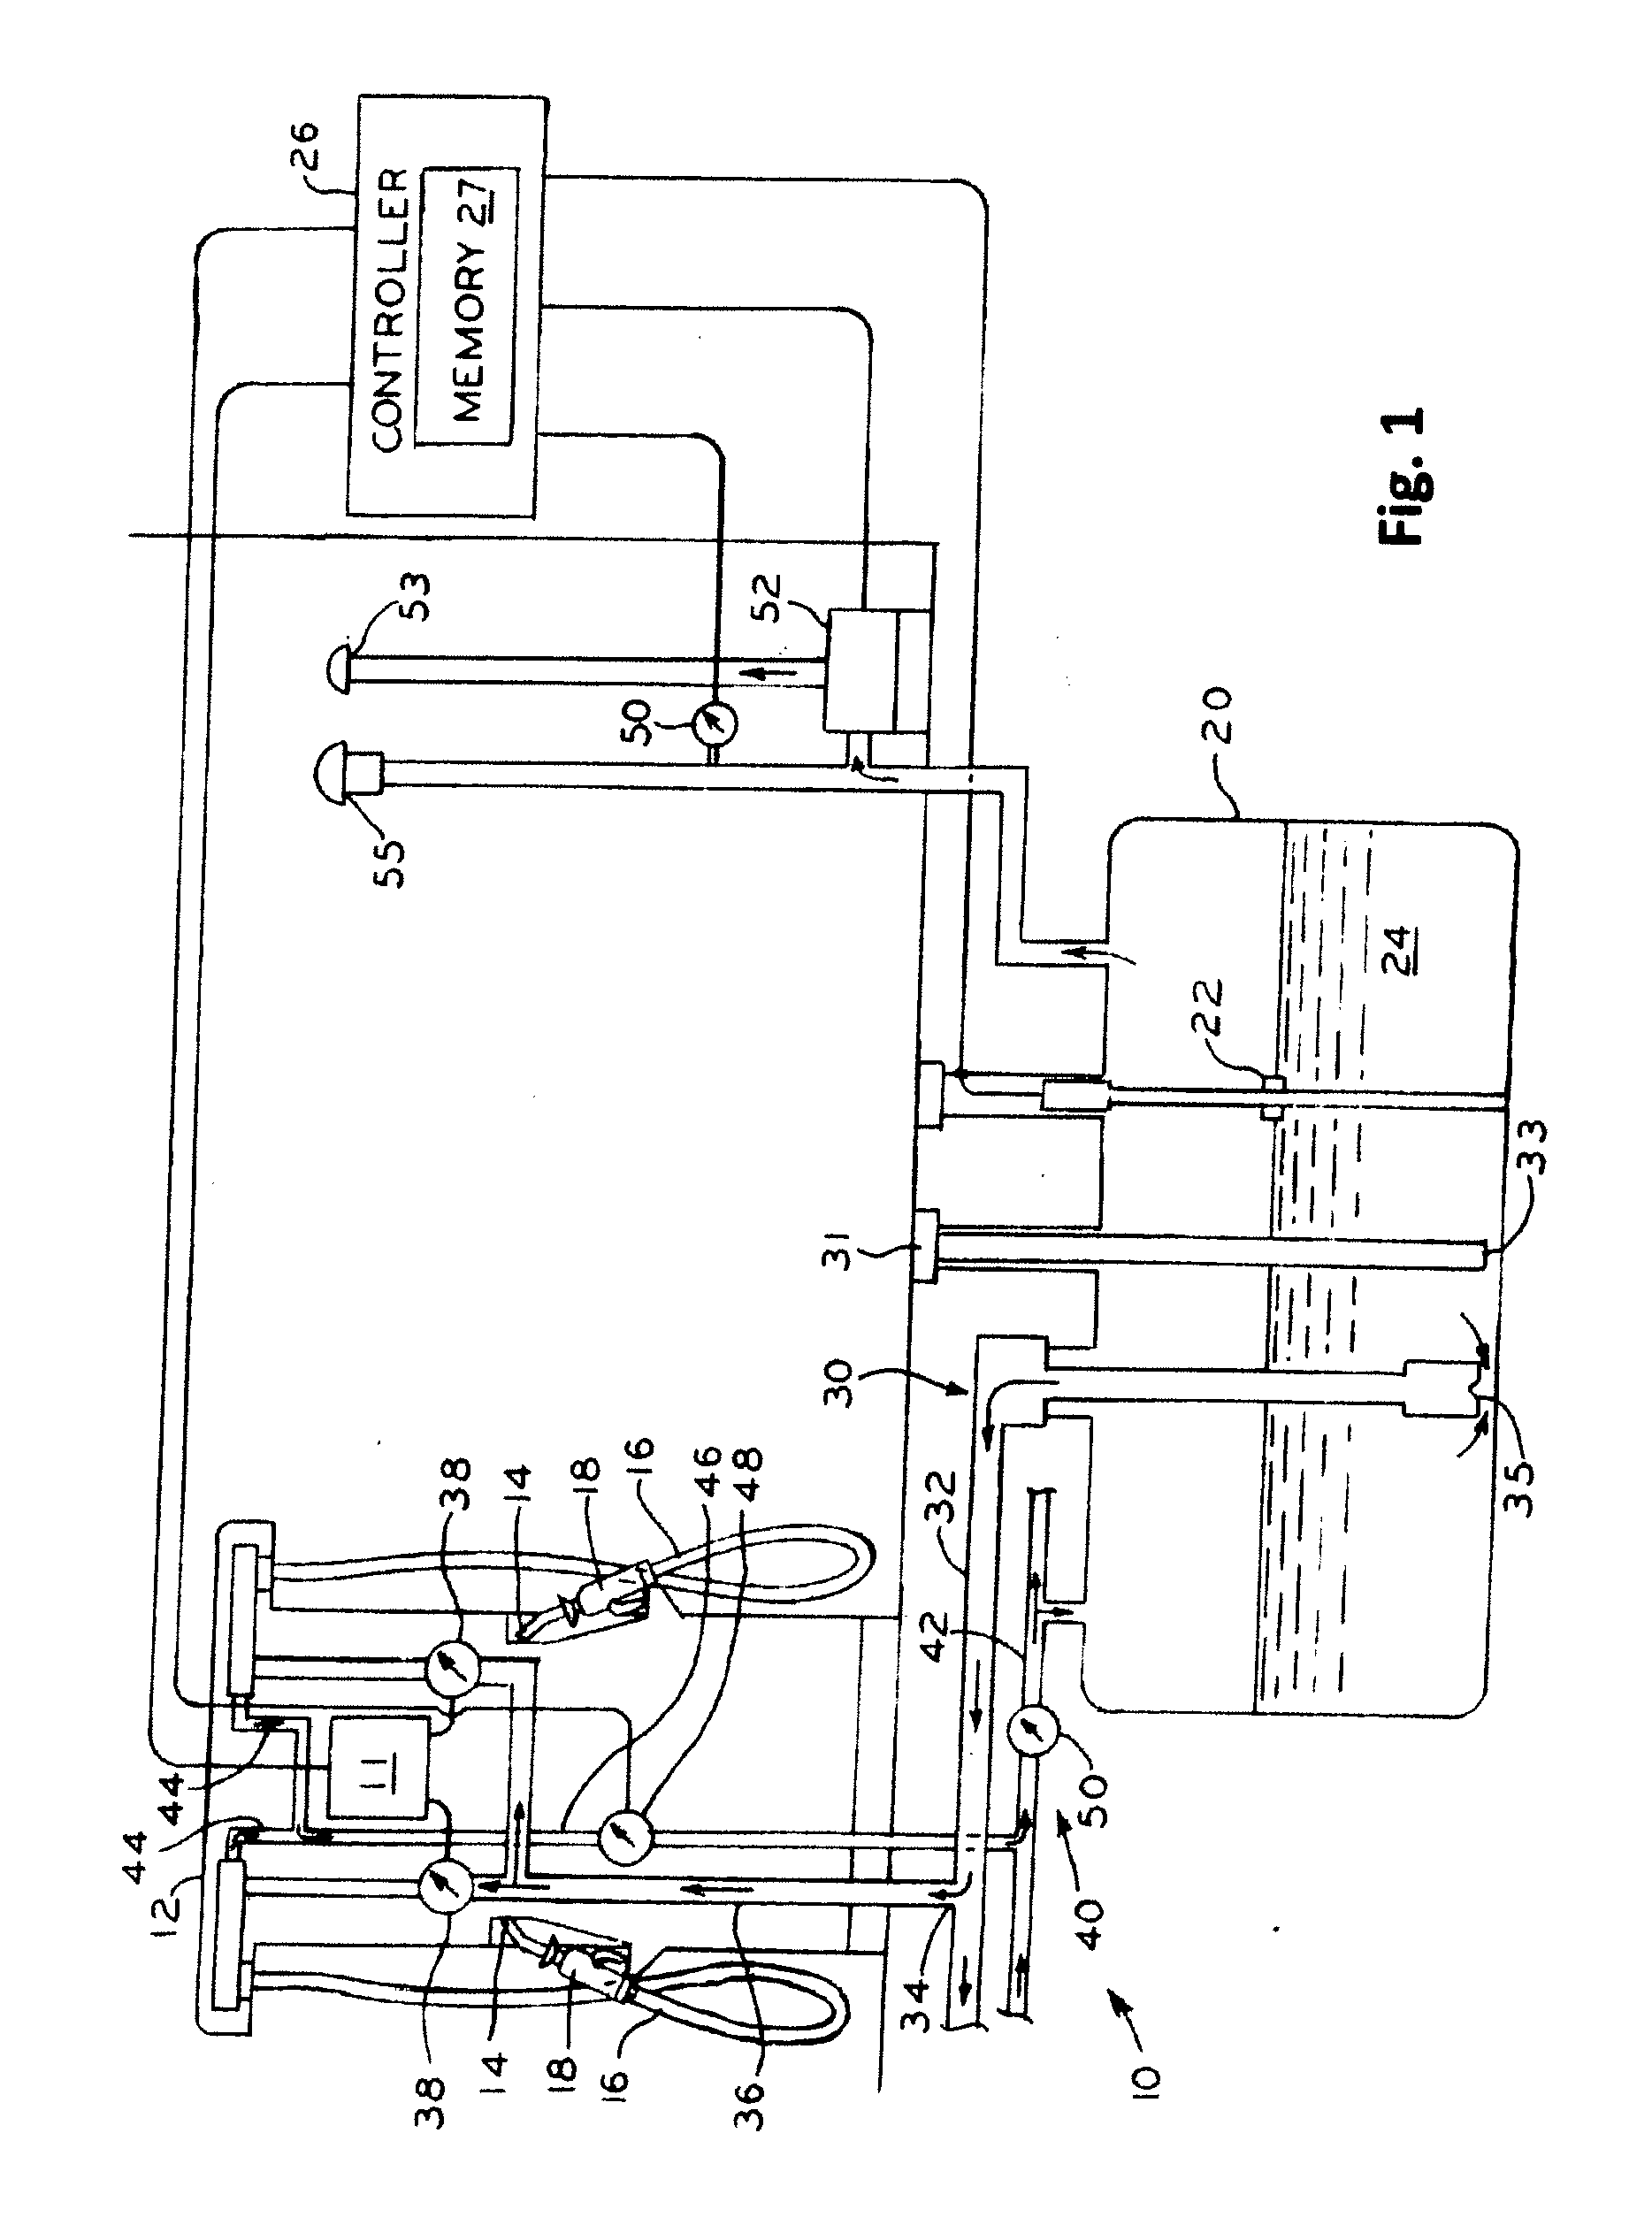 Method and apparatus for monitoring for leaks in a stage ii fuel vapor recovery system